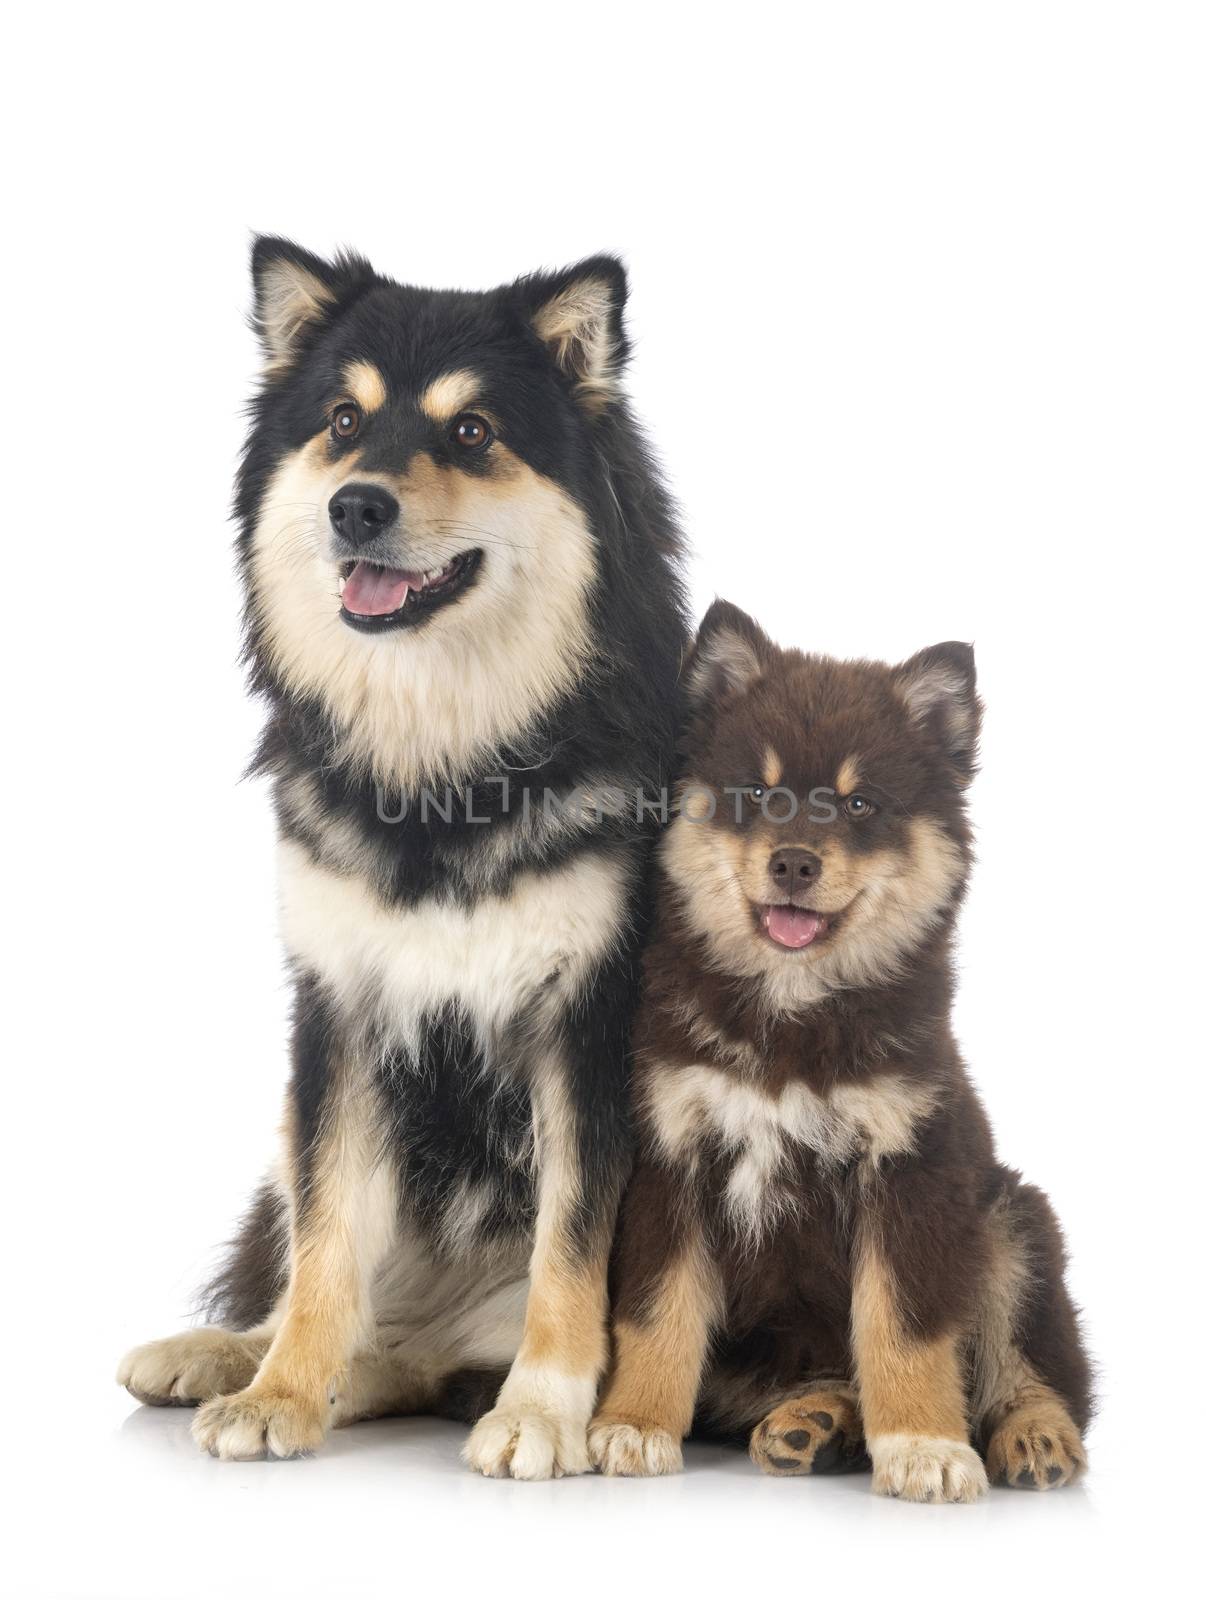  puppy and adult Finnish Lapphund  by cynoclub